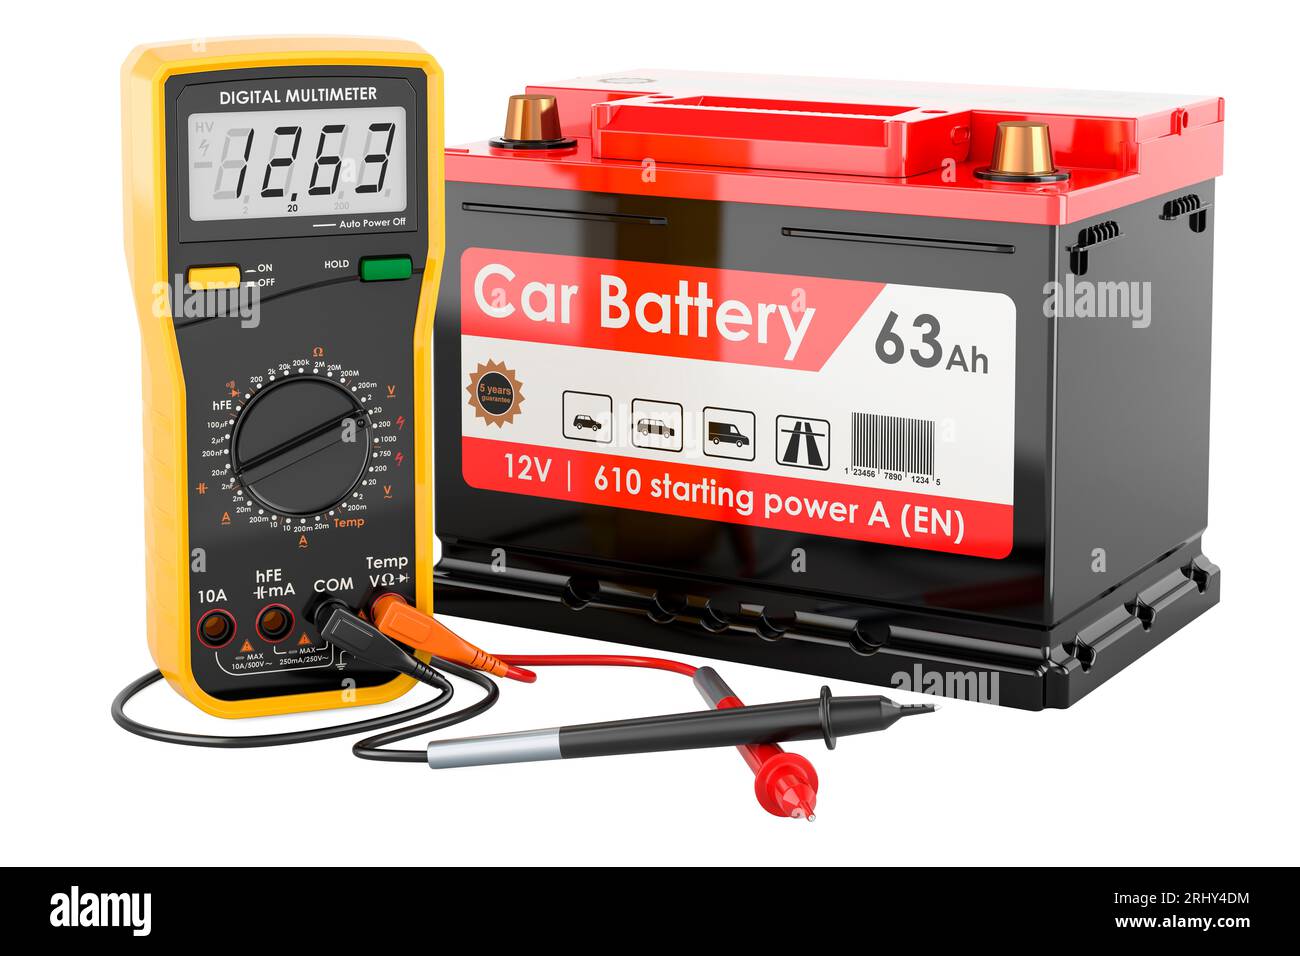 Digital multimeter and car battery, 3D rendering isolated on white background Stock Photo